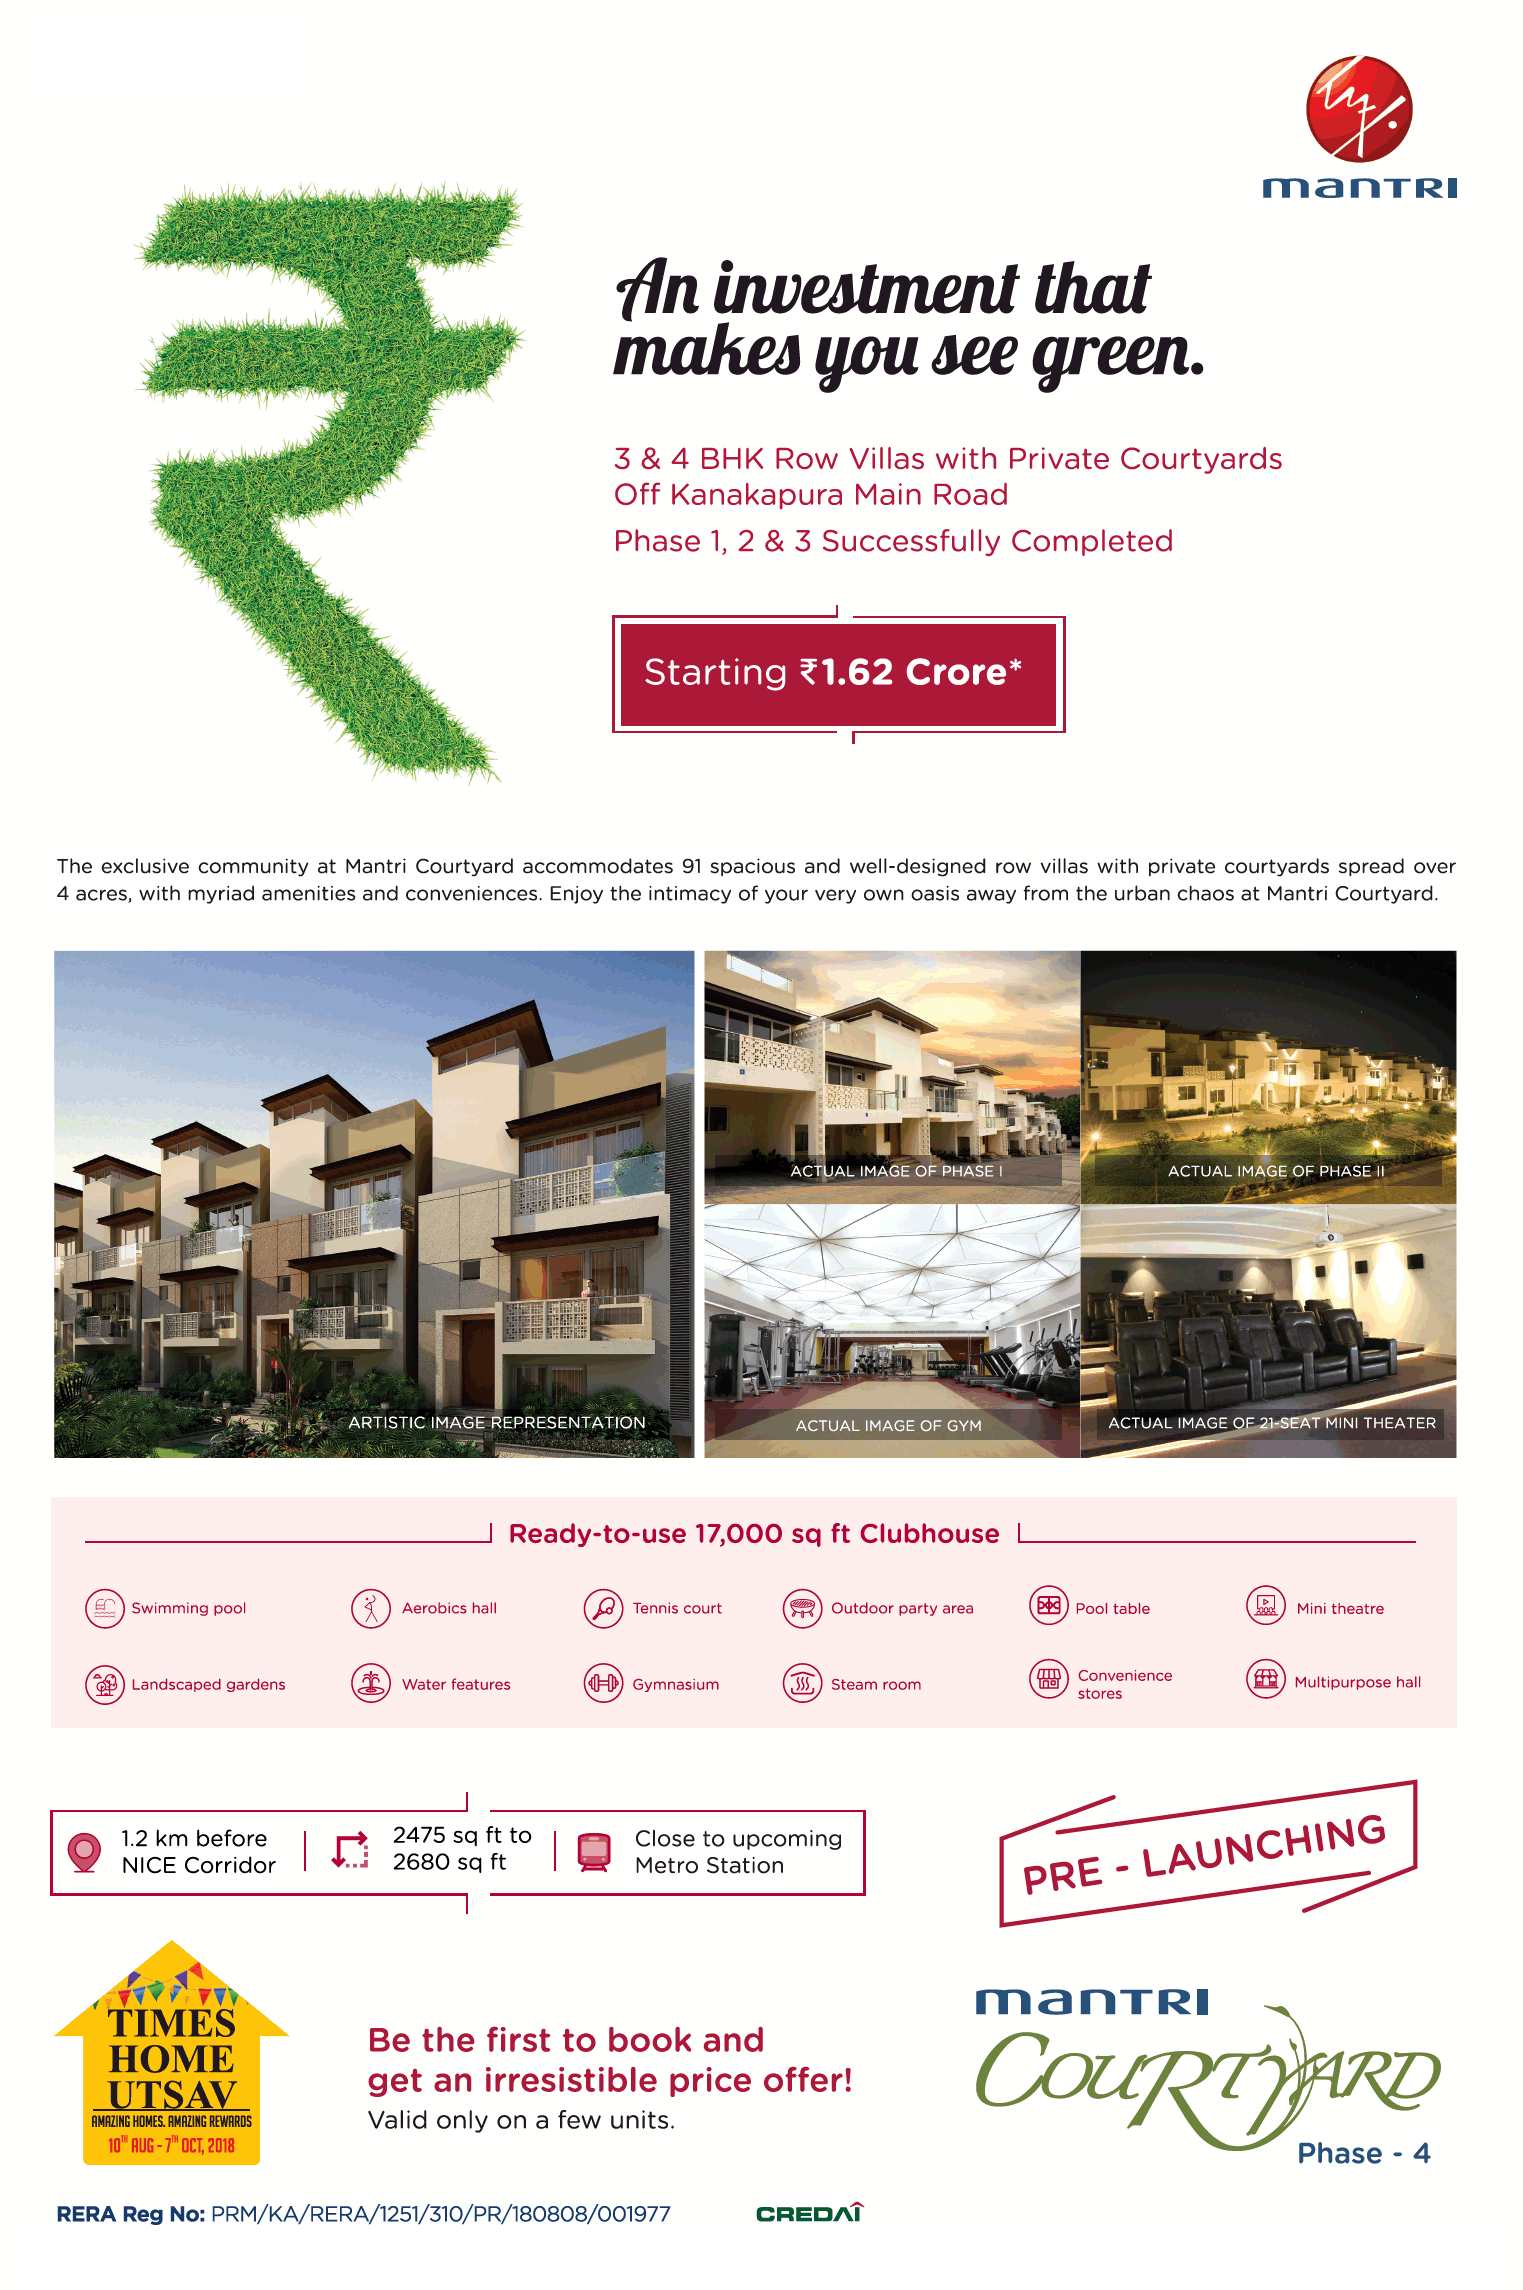 Book row villas with private courtyards @ Rs 1.62 cr at Mantri Courtyard in Bangalore